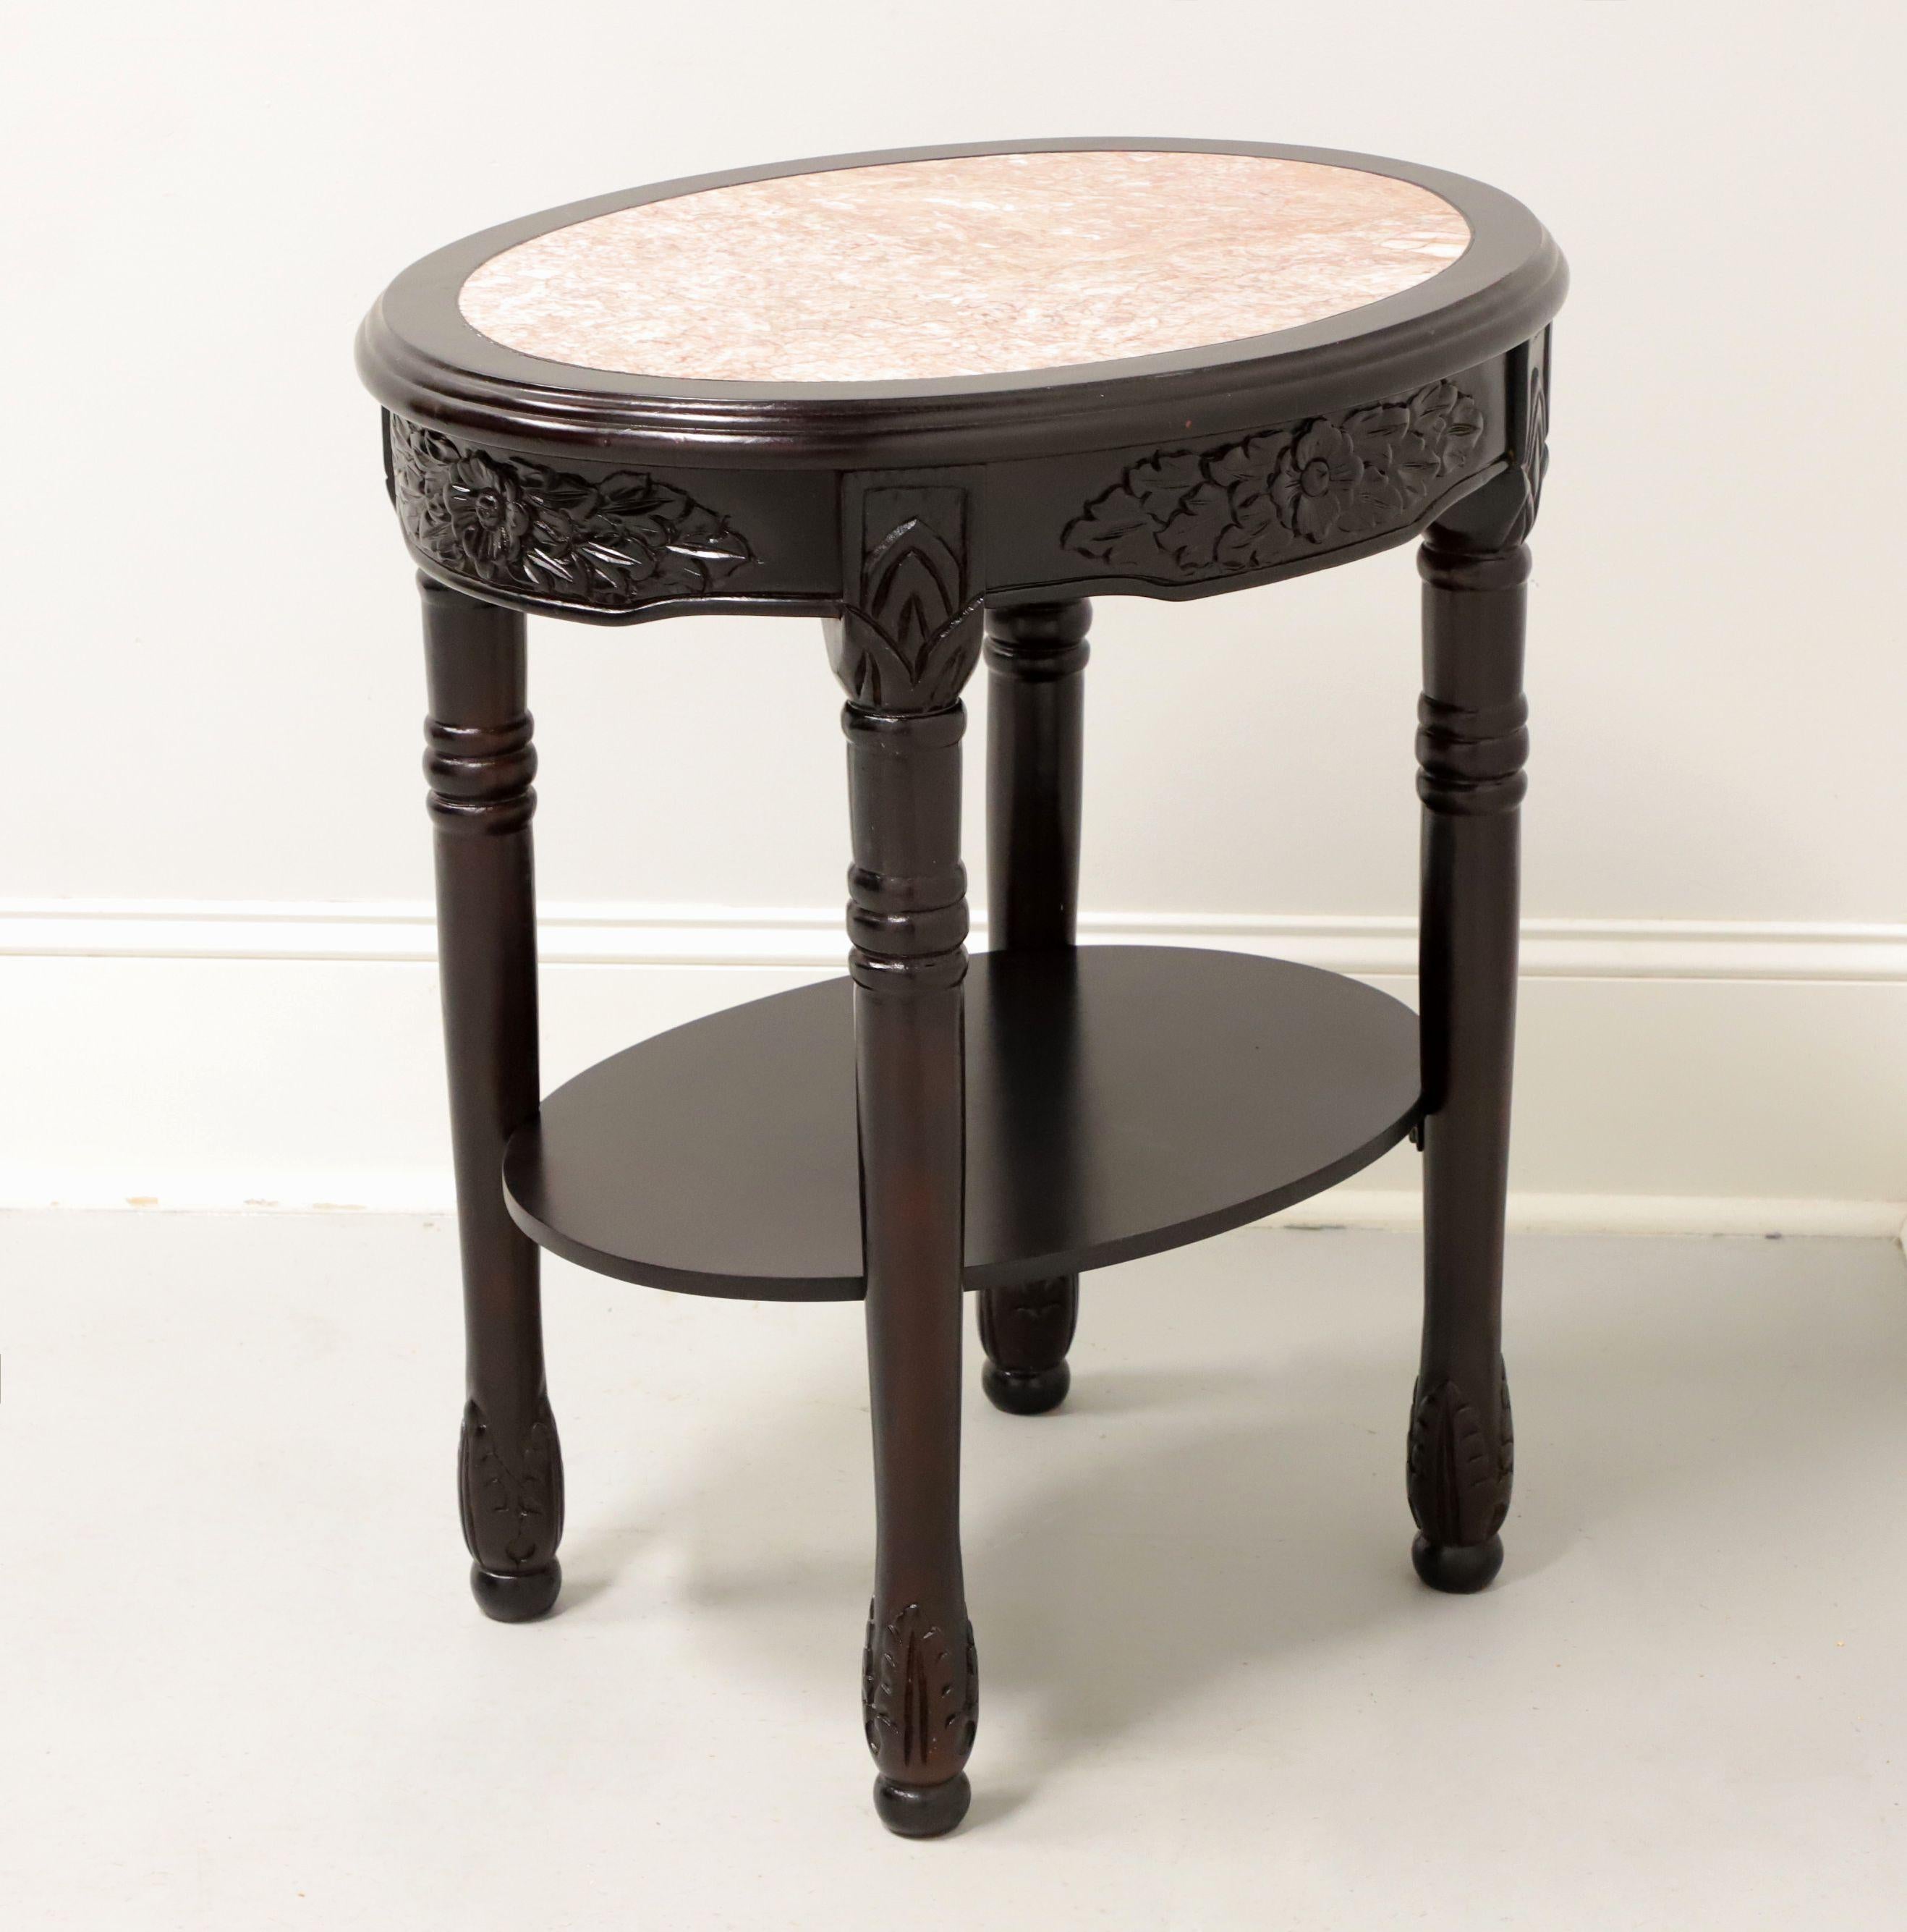 American Antique Rosewood Finish Victorian Oval Marble Top Occasional Table - A For Sale